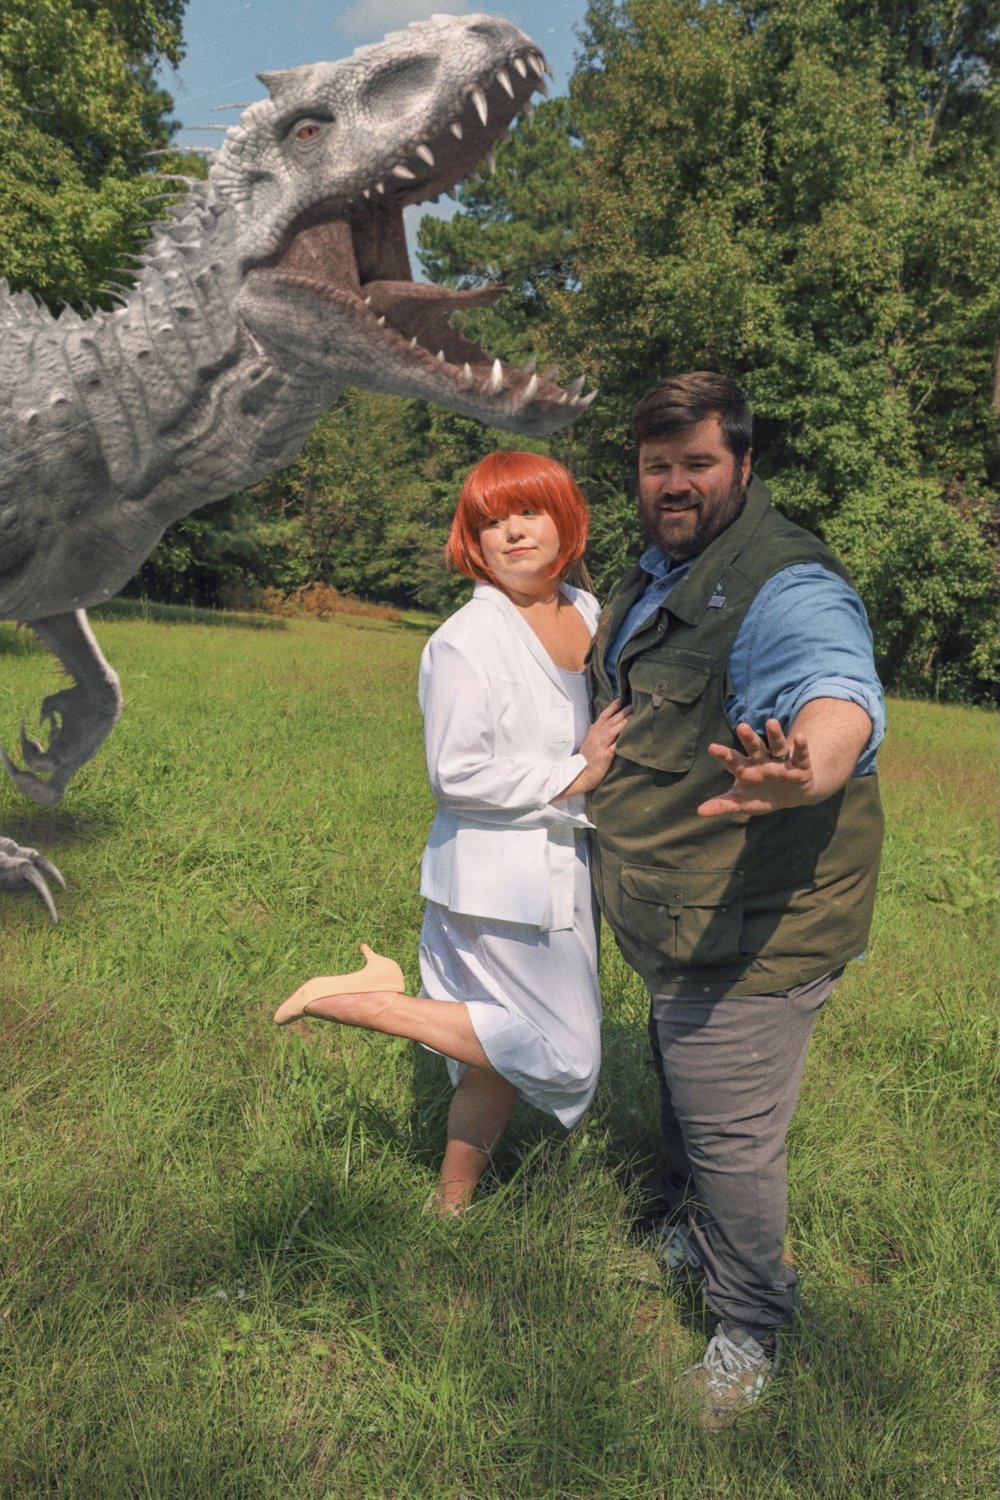 jurassic park costumes — Blog — Living It Up With Laurel